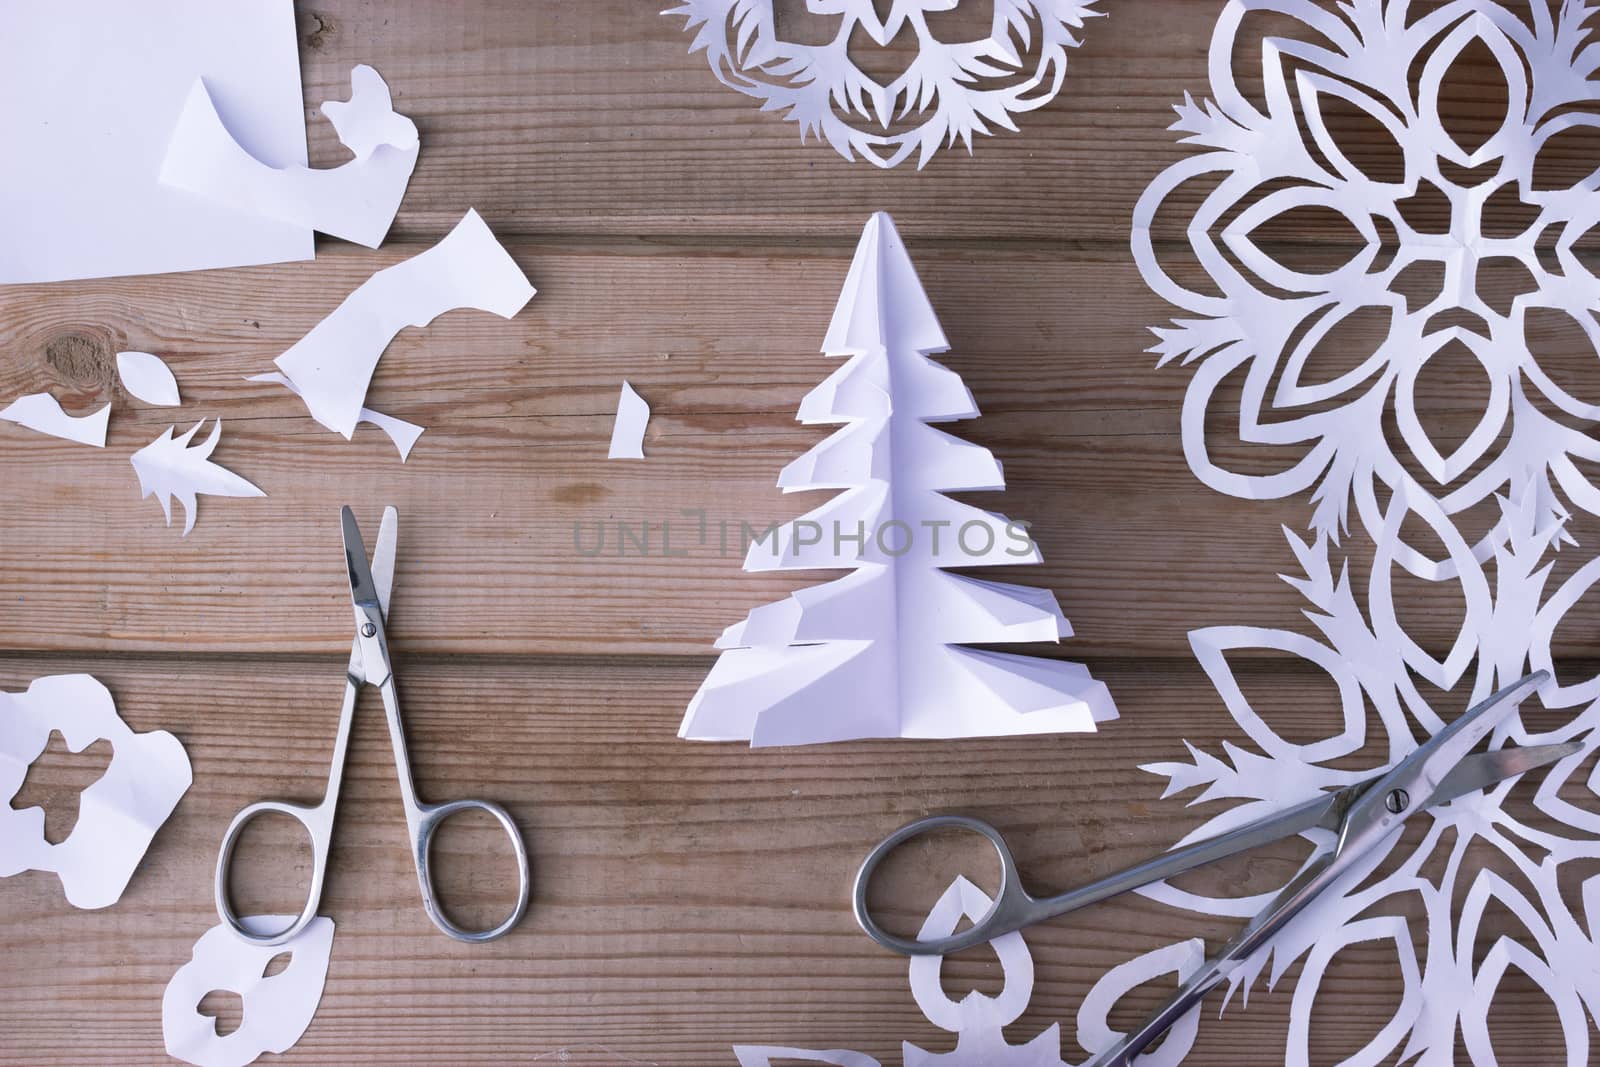 handmade paper snowflakes and scissors on wooden table by liwei12